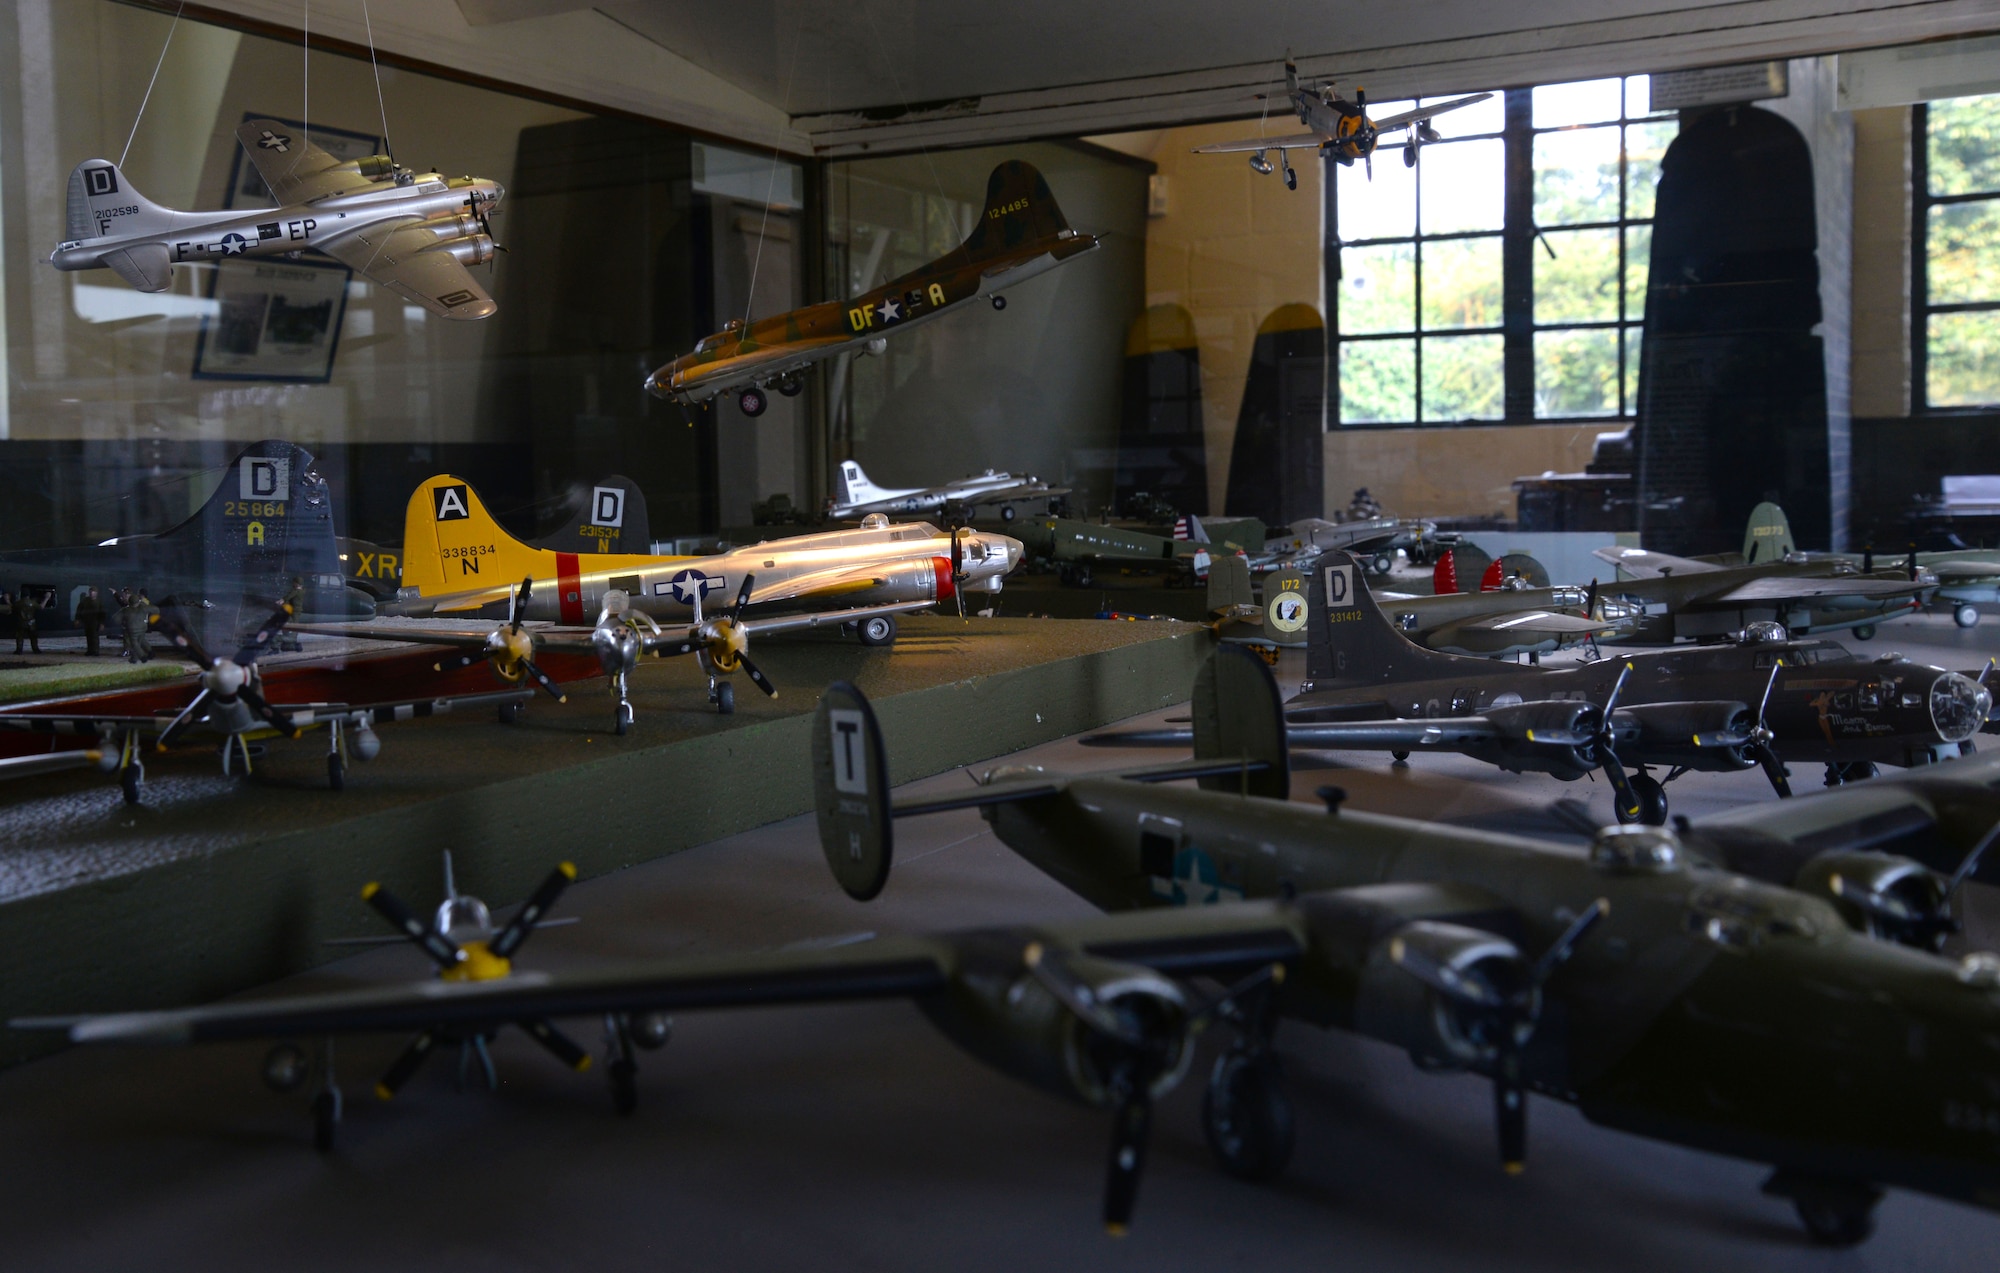 Model aircraft are displayed as part of the collection of artifacts at the Thorpe Abbotts museum Aug. 25, 2016, in East Anglia, England. The museum consists of the reconstructed air traffic control tower and two hangars. The museum is maintained by local volunteers and is donation based. (U.S. Air Force photo by Senior Airman Justine Rho)